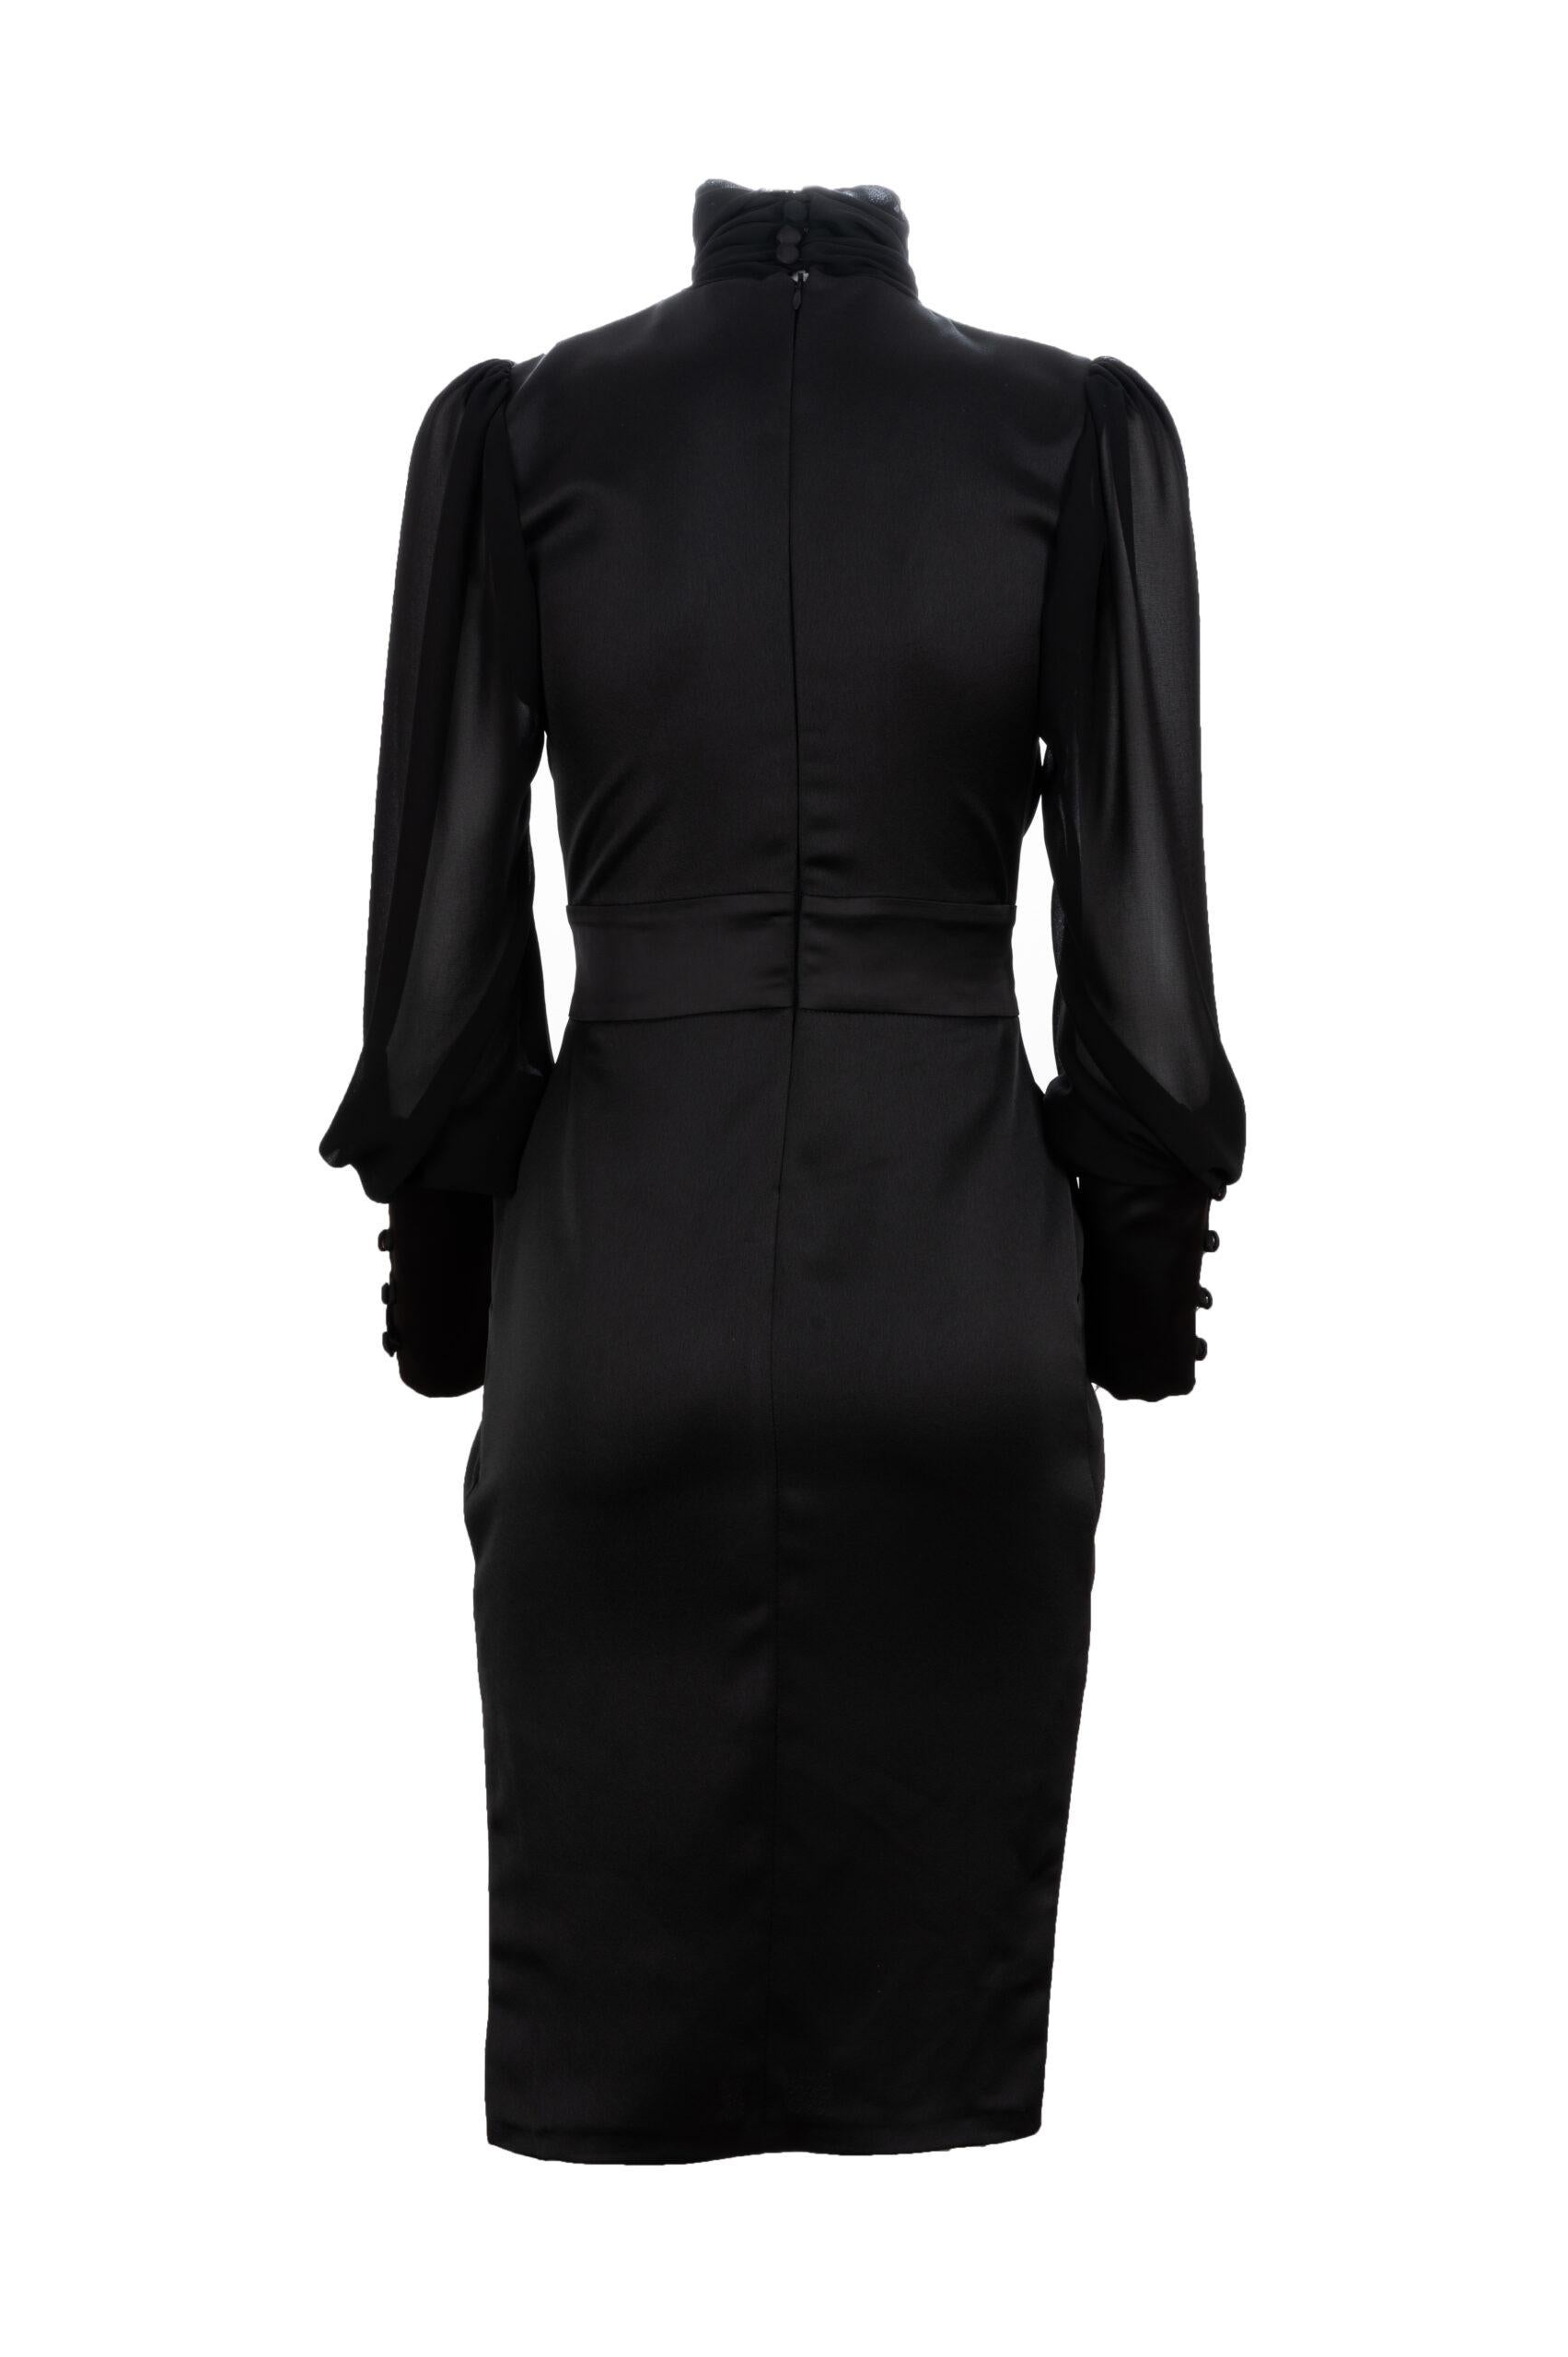 Black silk long sleeves dress NWOT
Maya dress features see through sleeves, high neck and slits on both sides. The dress is finished with luxe satin buttons on the cuffs and on the collar. 

 

COMPOSITION: 97%PL 3%LY